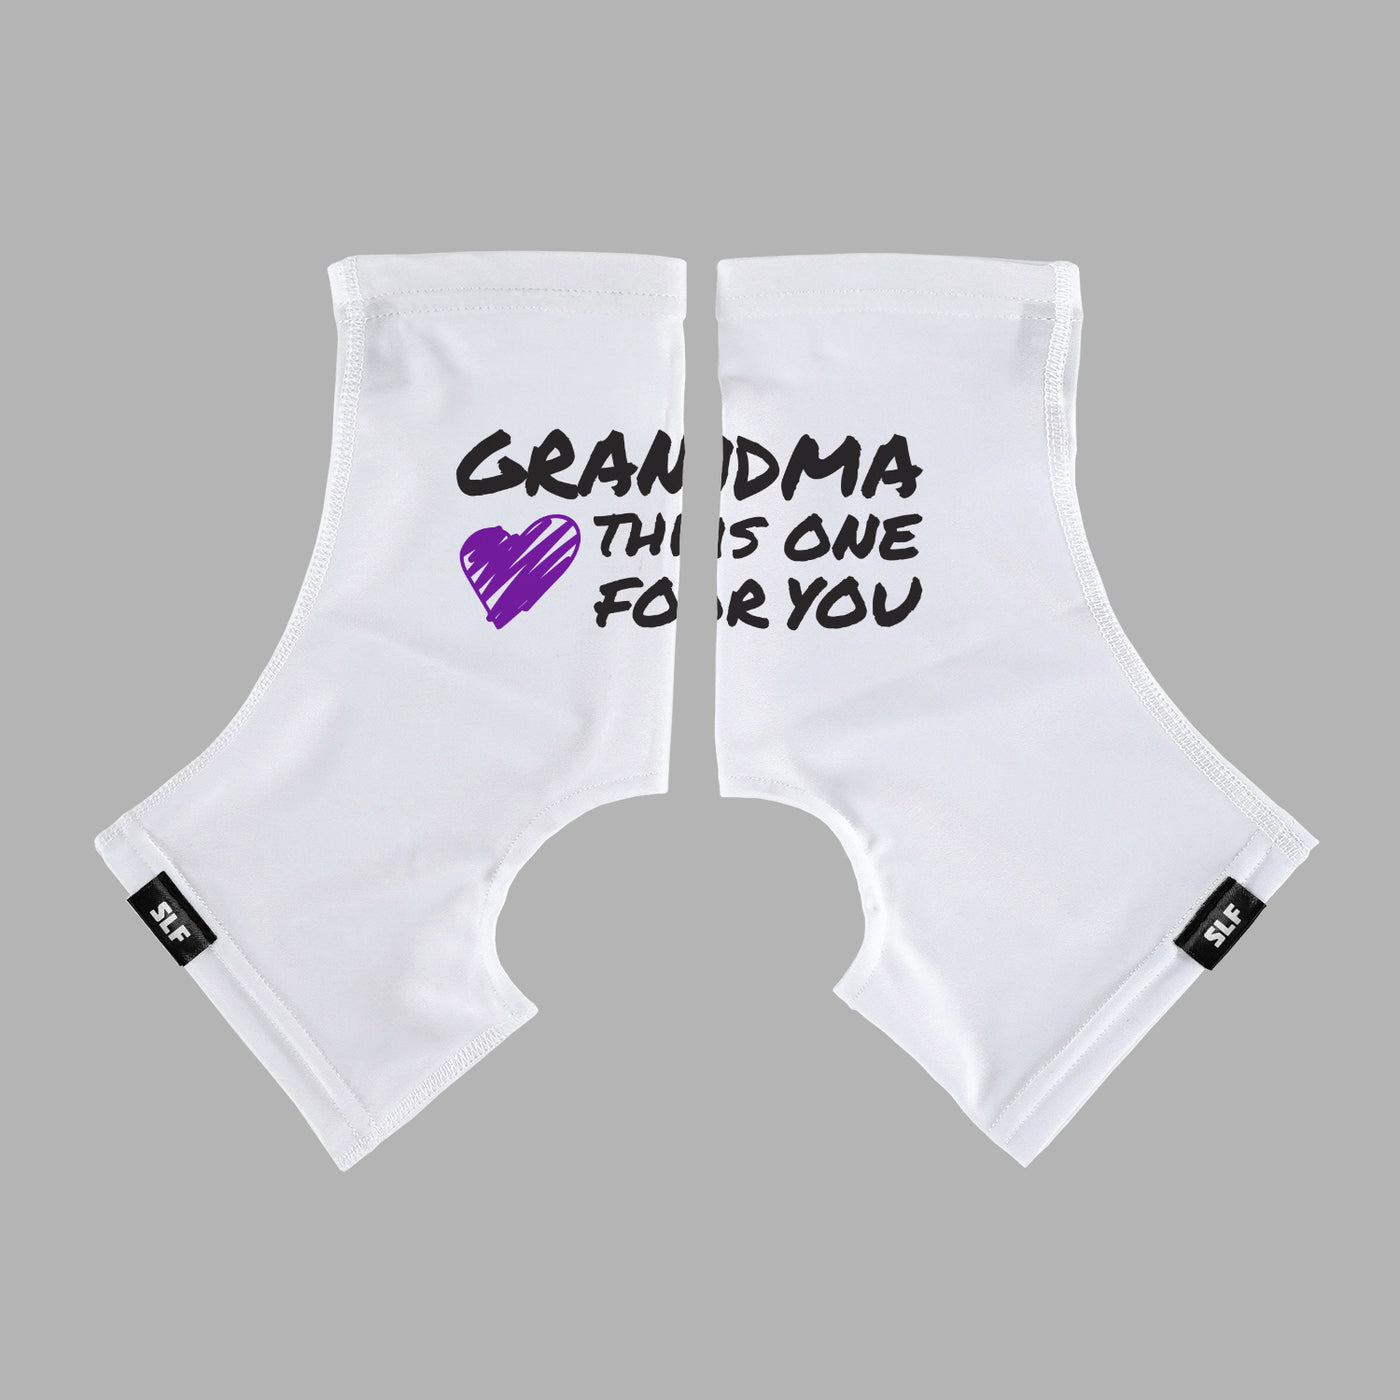 Grandma This One For You Spats / Cleat Covers